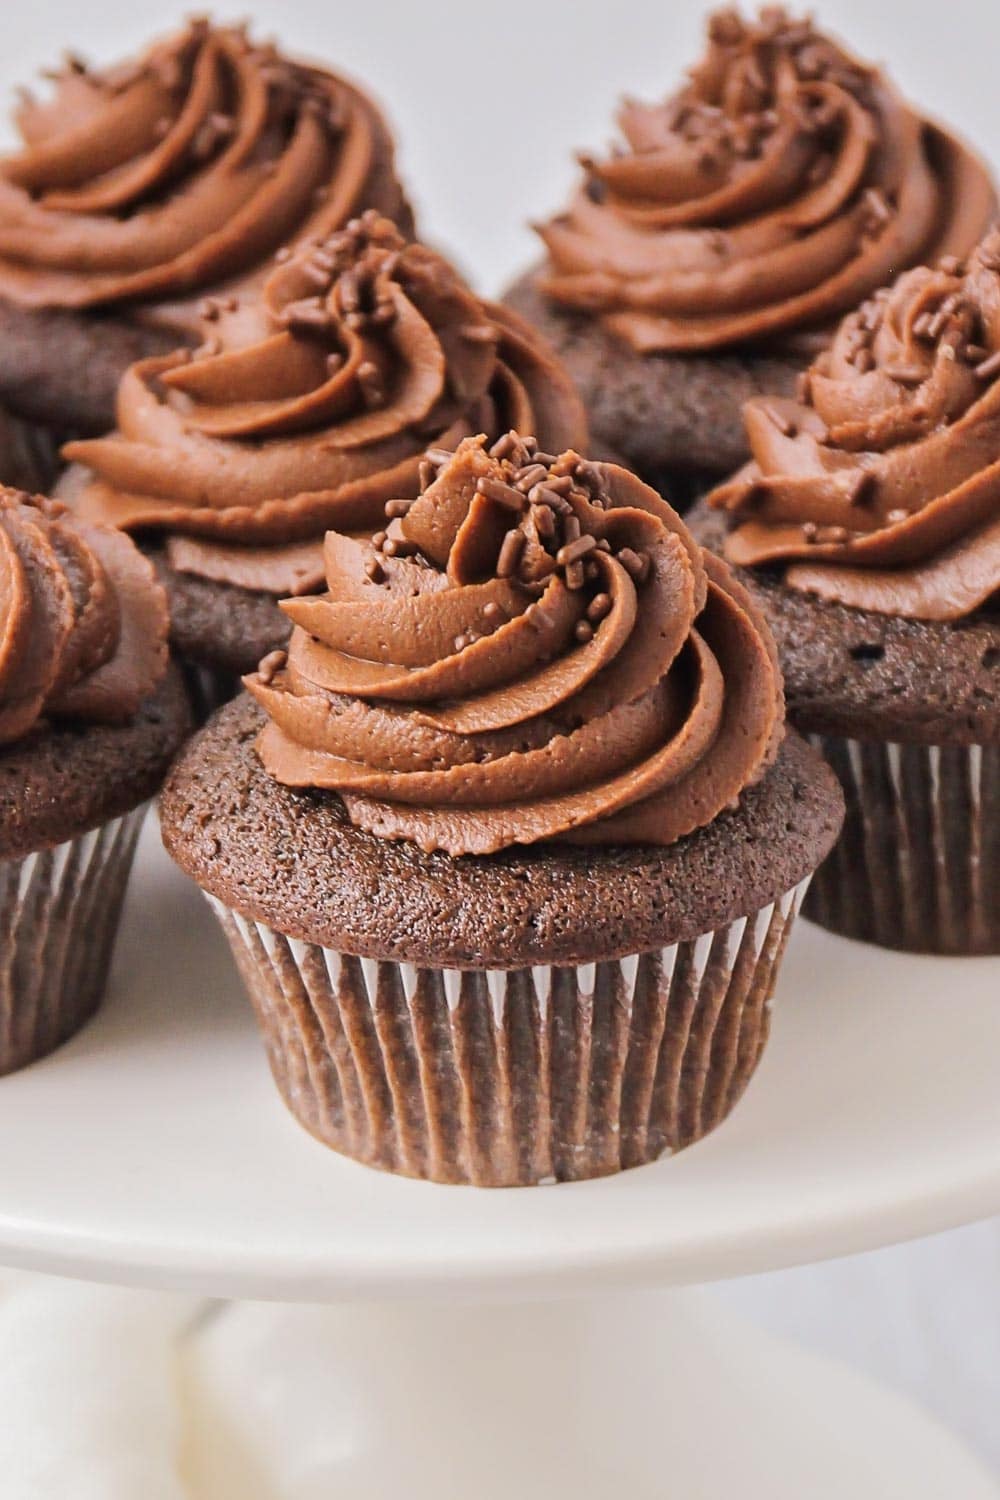 Chocolate buttercream on top of chocolate cupcakes 